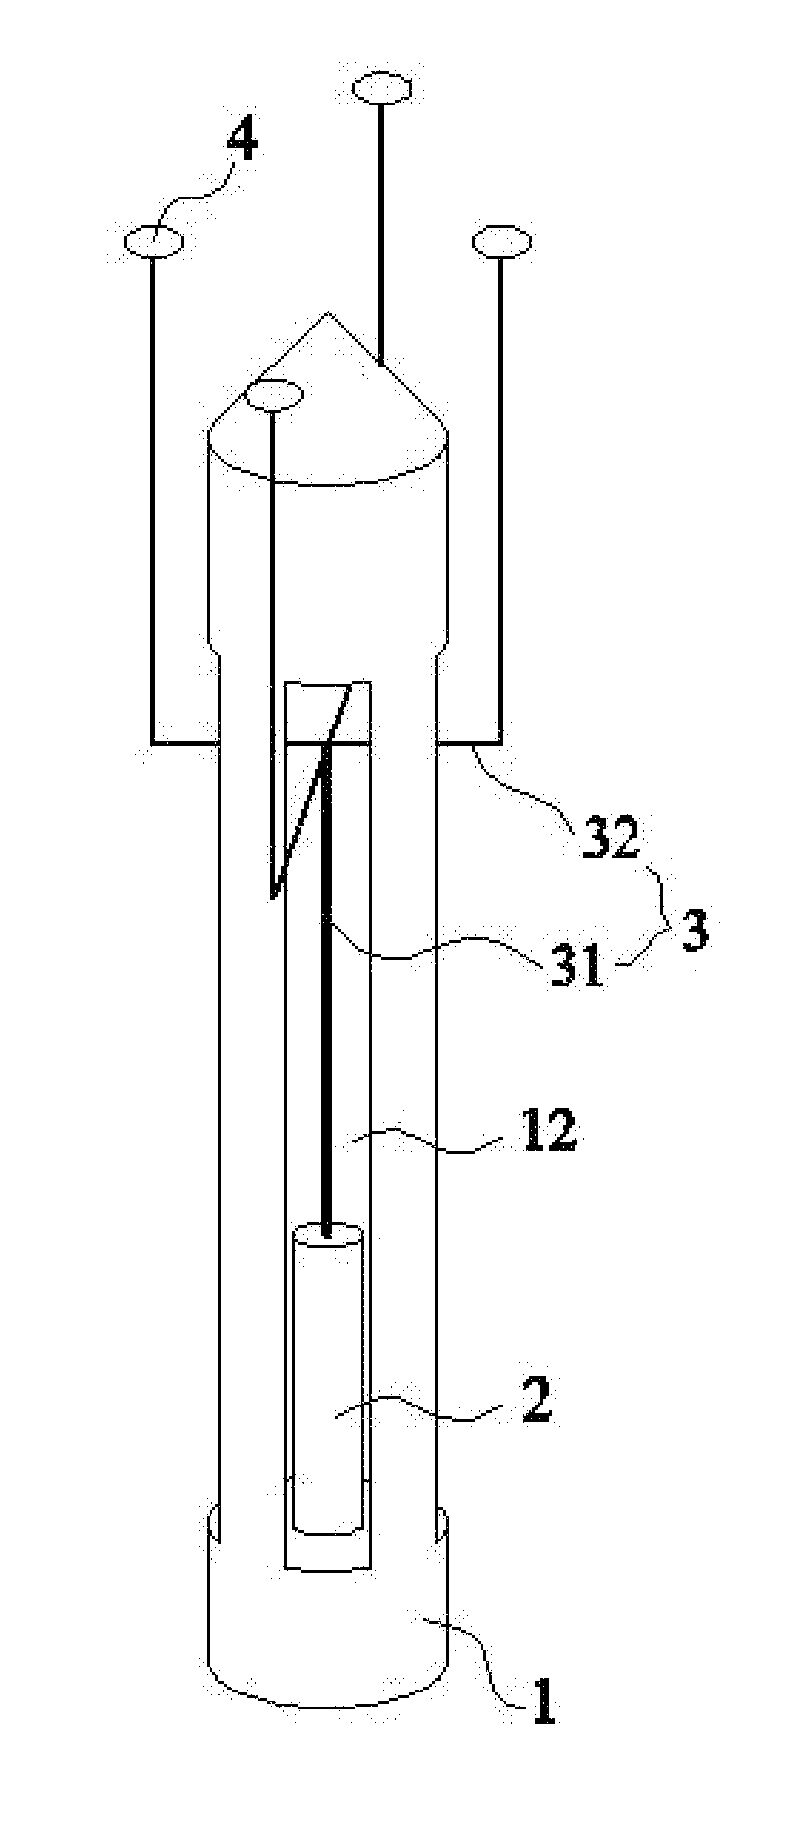 Substrate support structure, vacuum drying apparatus and method for vacuum drying a substrate